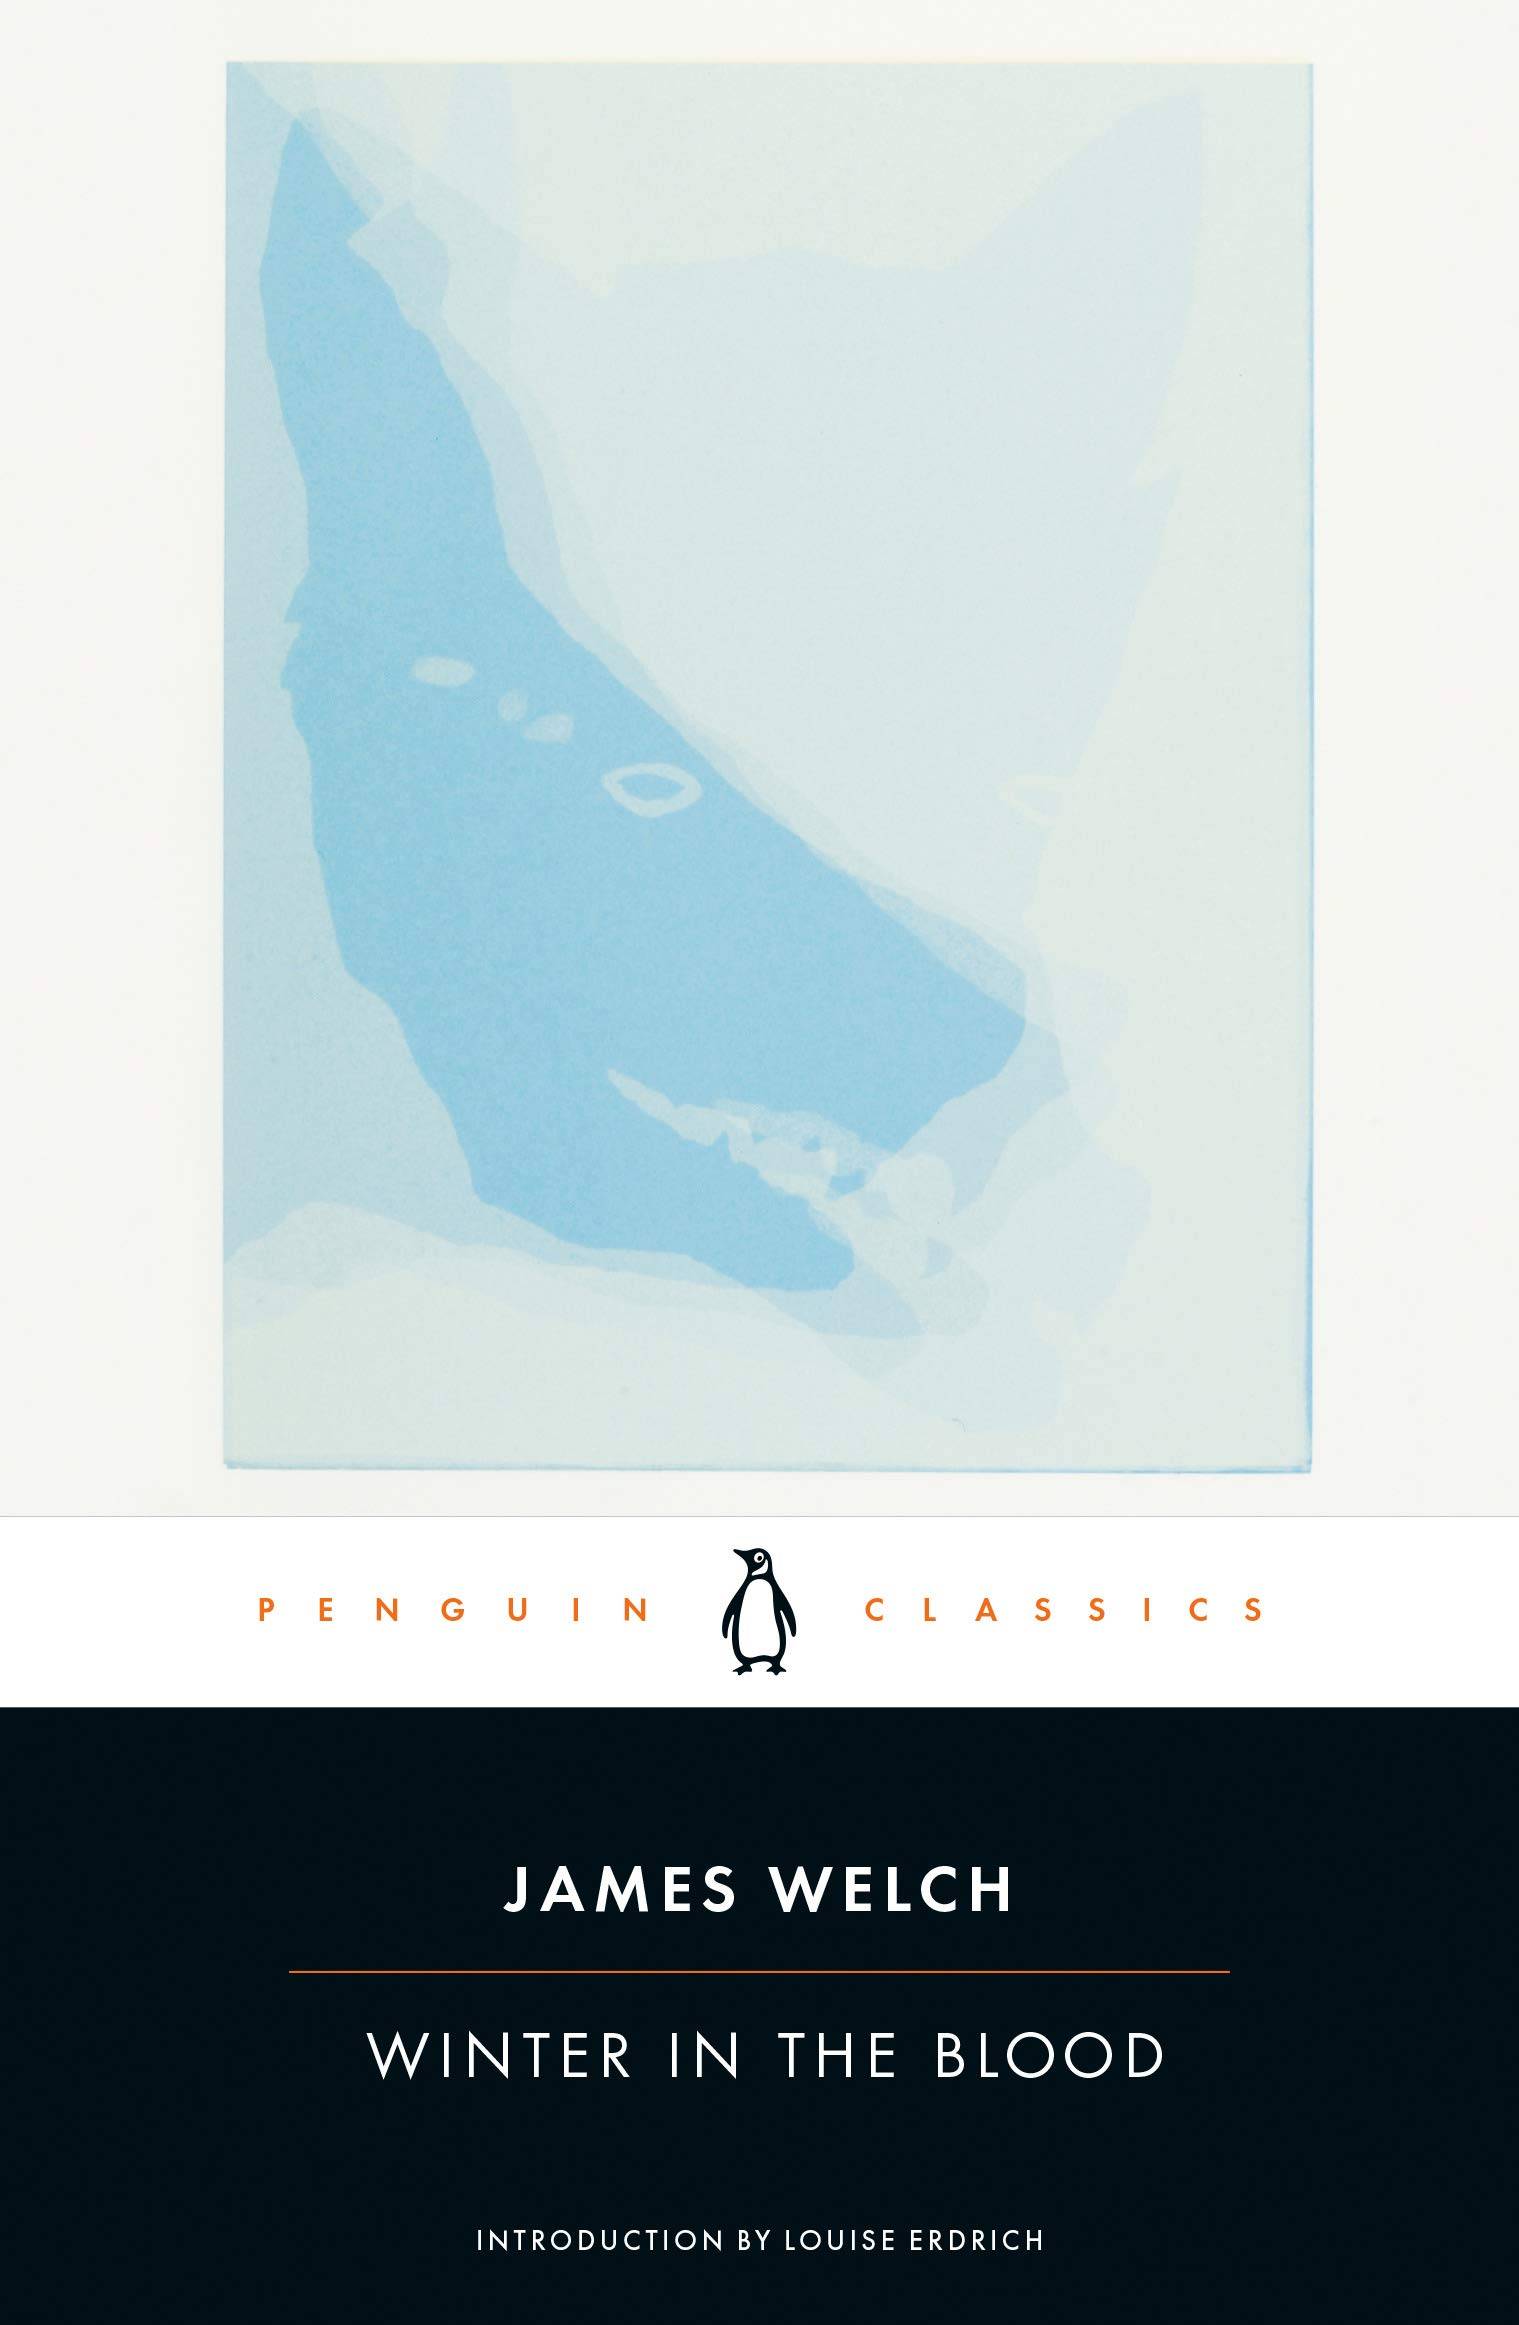 Book cover with abstract snowy shapes